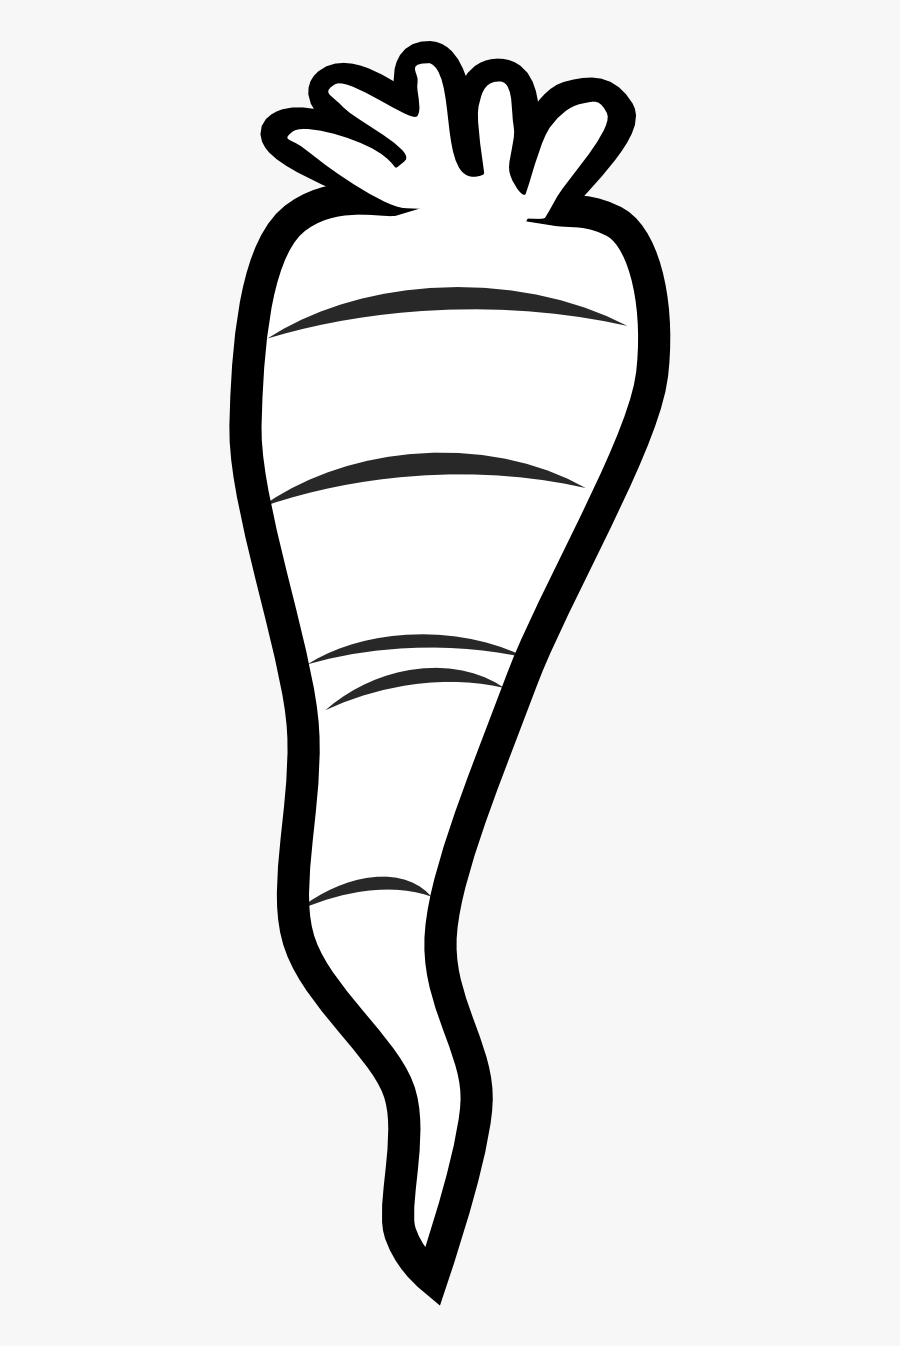 Cobra - Clipart - Black - And - White - Carrots Black And White Clipart, Transparent Clipart